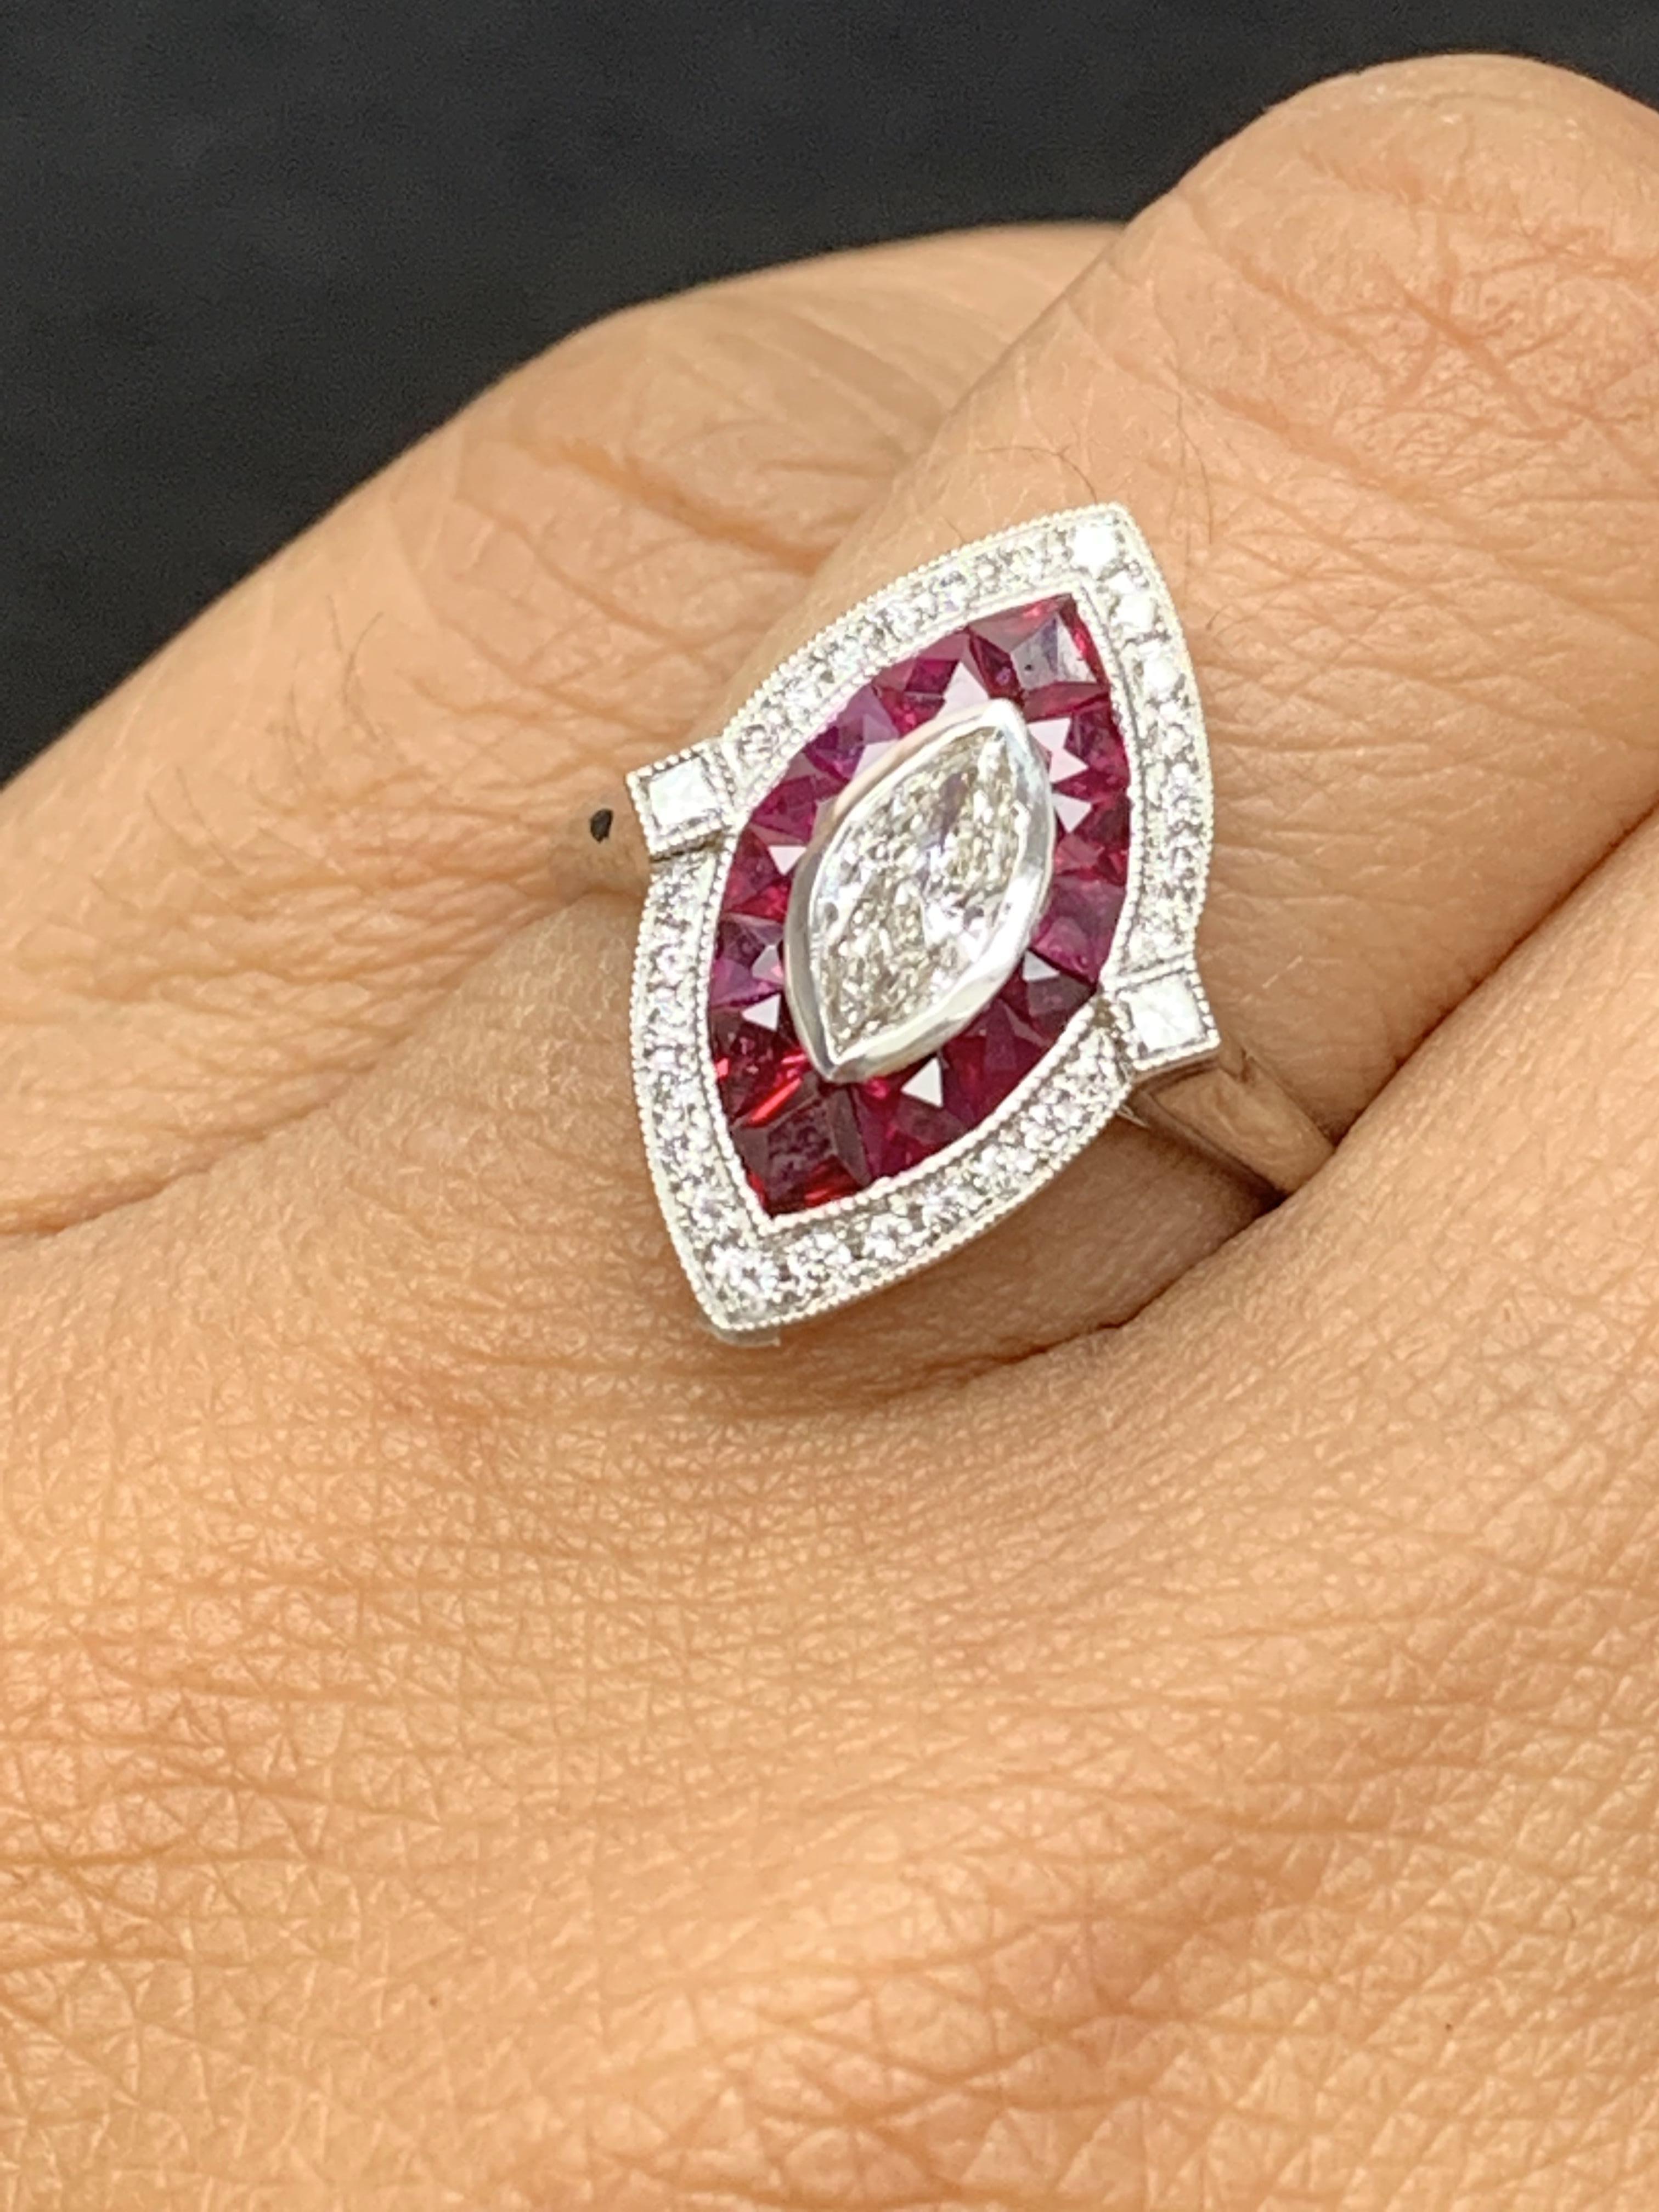 A beautiful cocktail ring style showcasing a 0.41-carat marquise cut diamond, surrounded by a single row of baguette shape 14 rubies weighing 0.71 carats and another row of 28 brilliant diamonds in an accented 14K white gold mounting. Accent